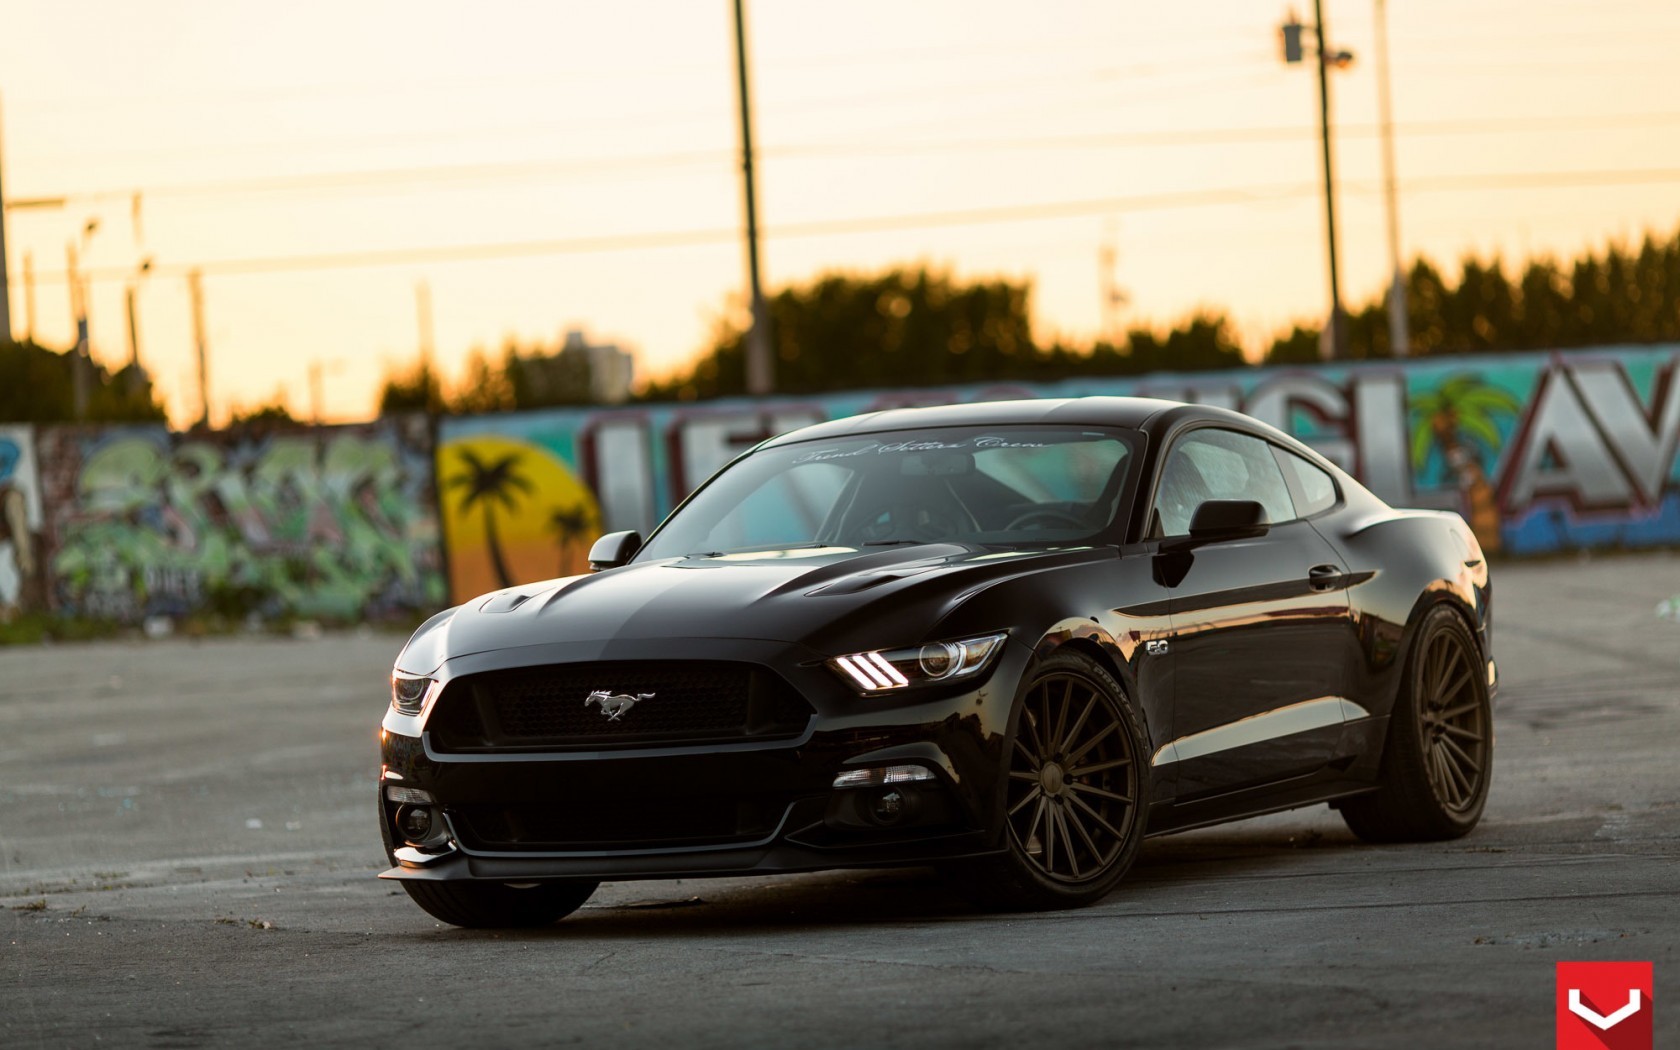 General 1680x1050 Ford Mustang Ford graffiti black cars vehicle car Ford Mustang S550 muscle cars American cars